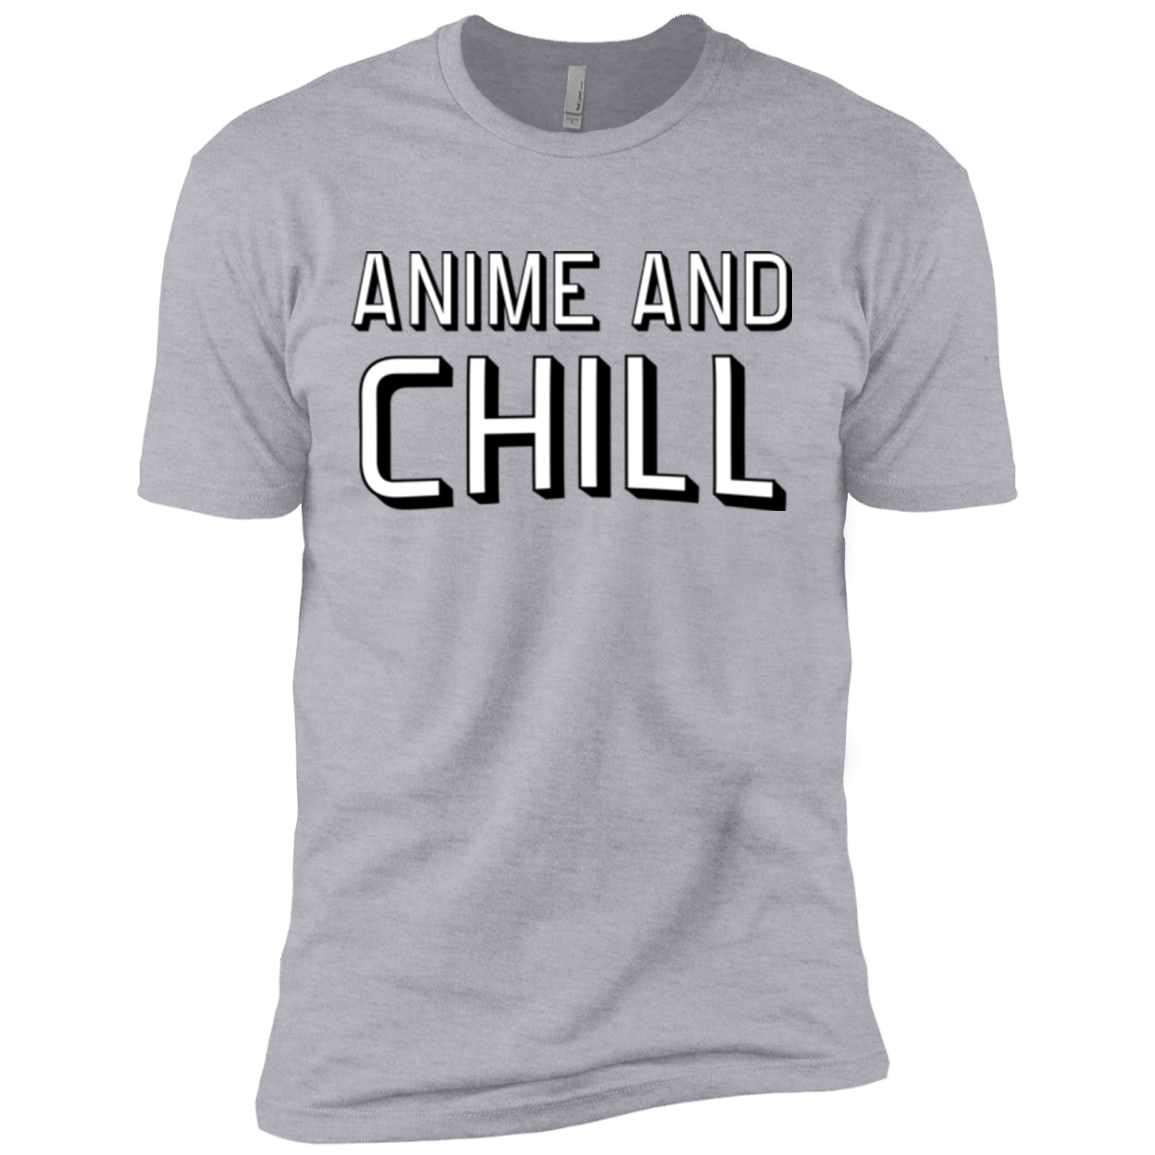 T-Shirts Heather Grey / X-Small Anime and chill Men's Premium T-Shirt